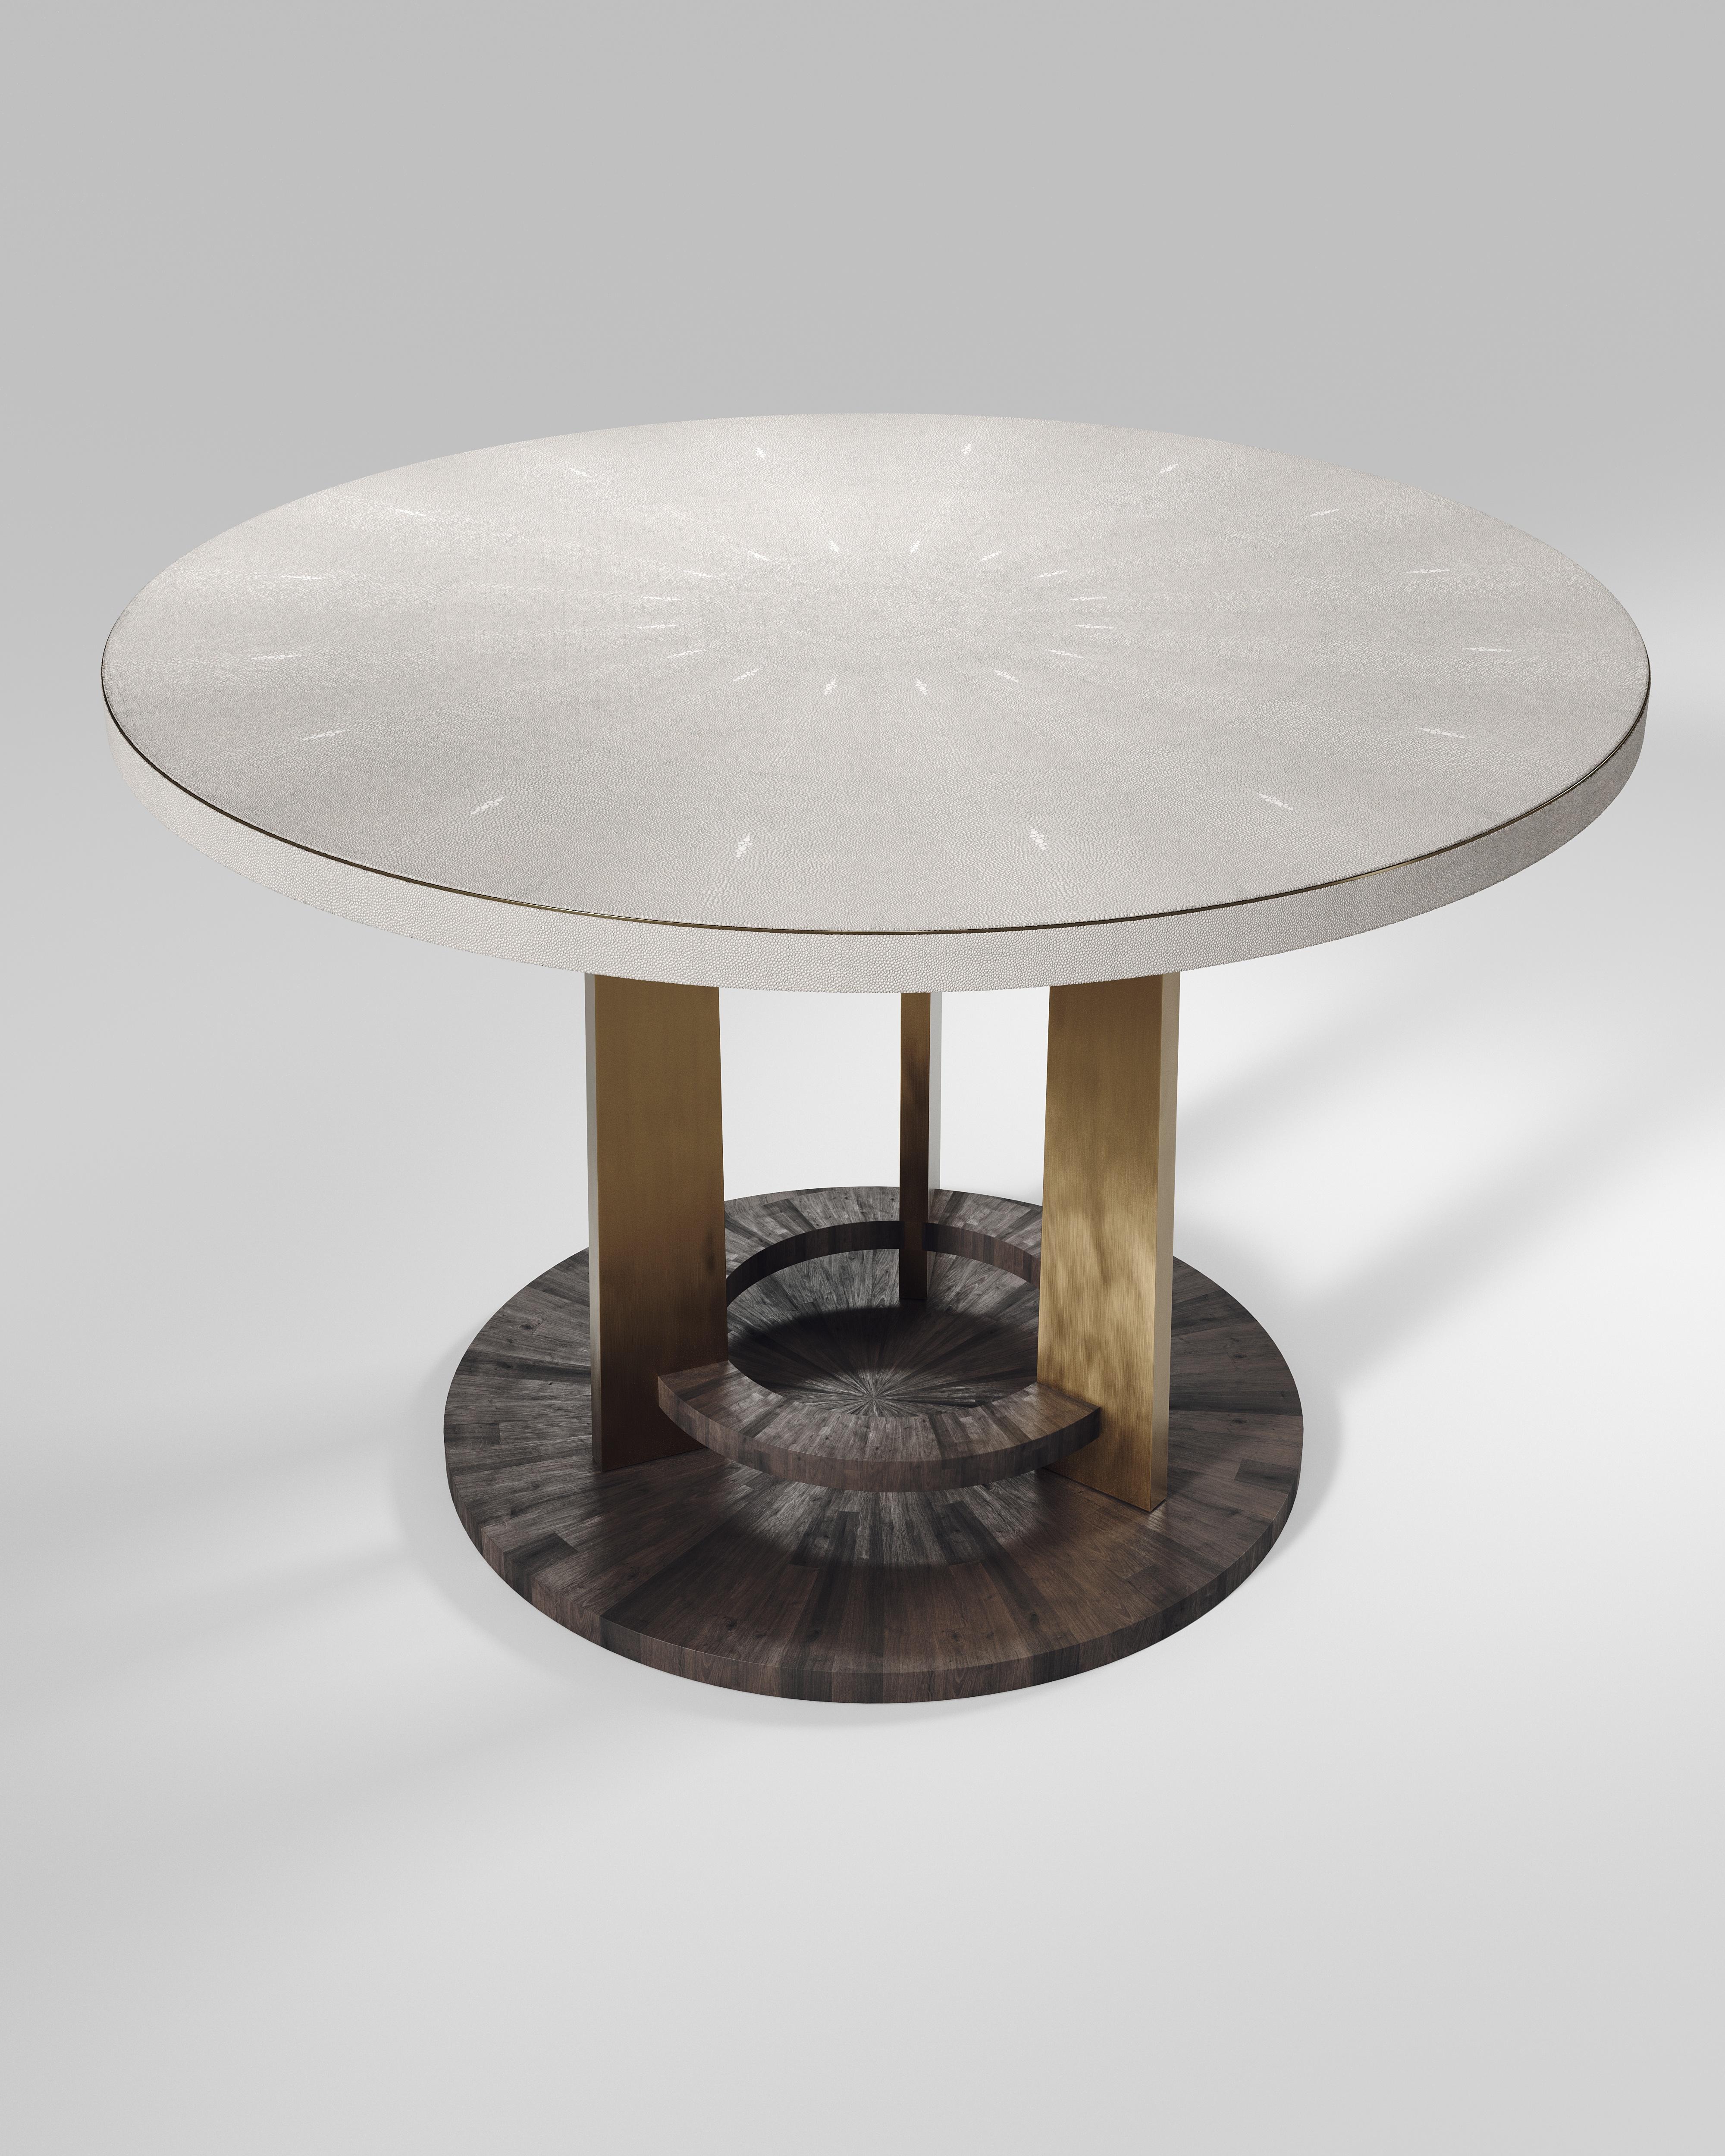 The Prague breakfast table by R&Y Augousti is an iconic design of their collection, debuting from the 1990s. This signature has been updated with metal accents on the border of the table and on the 3 legs. This classic center piece can be adapted